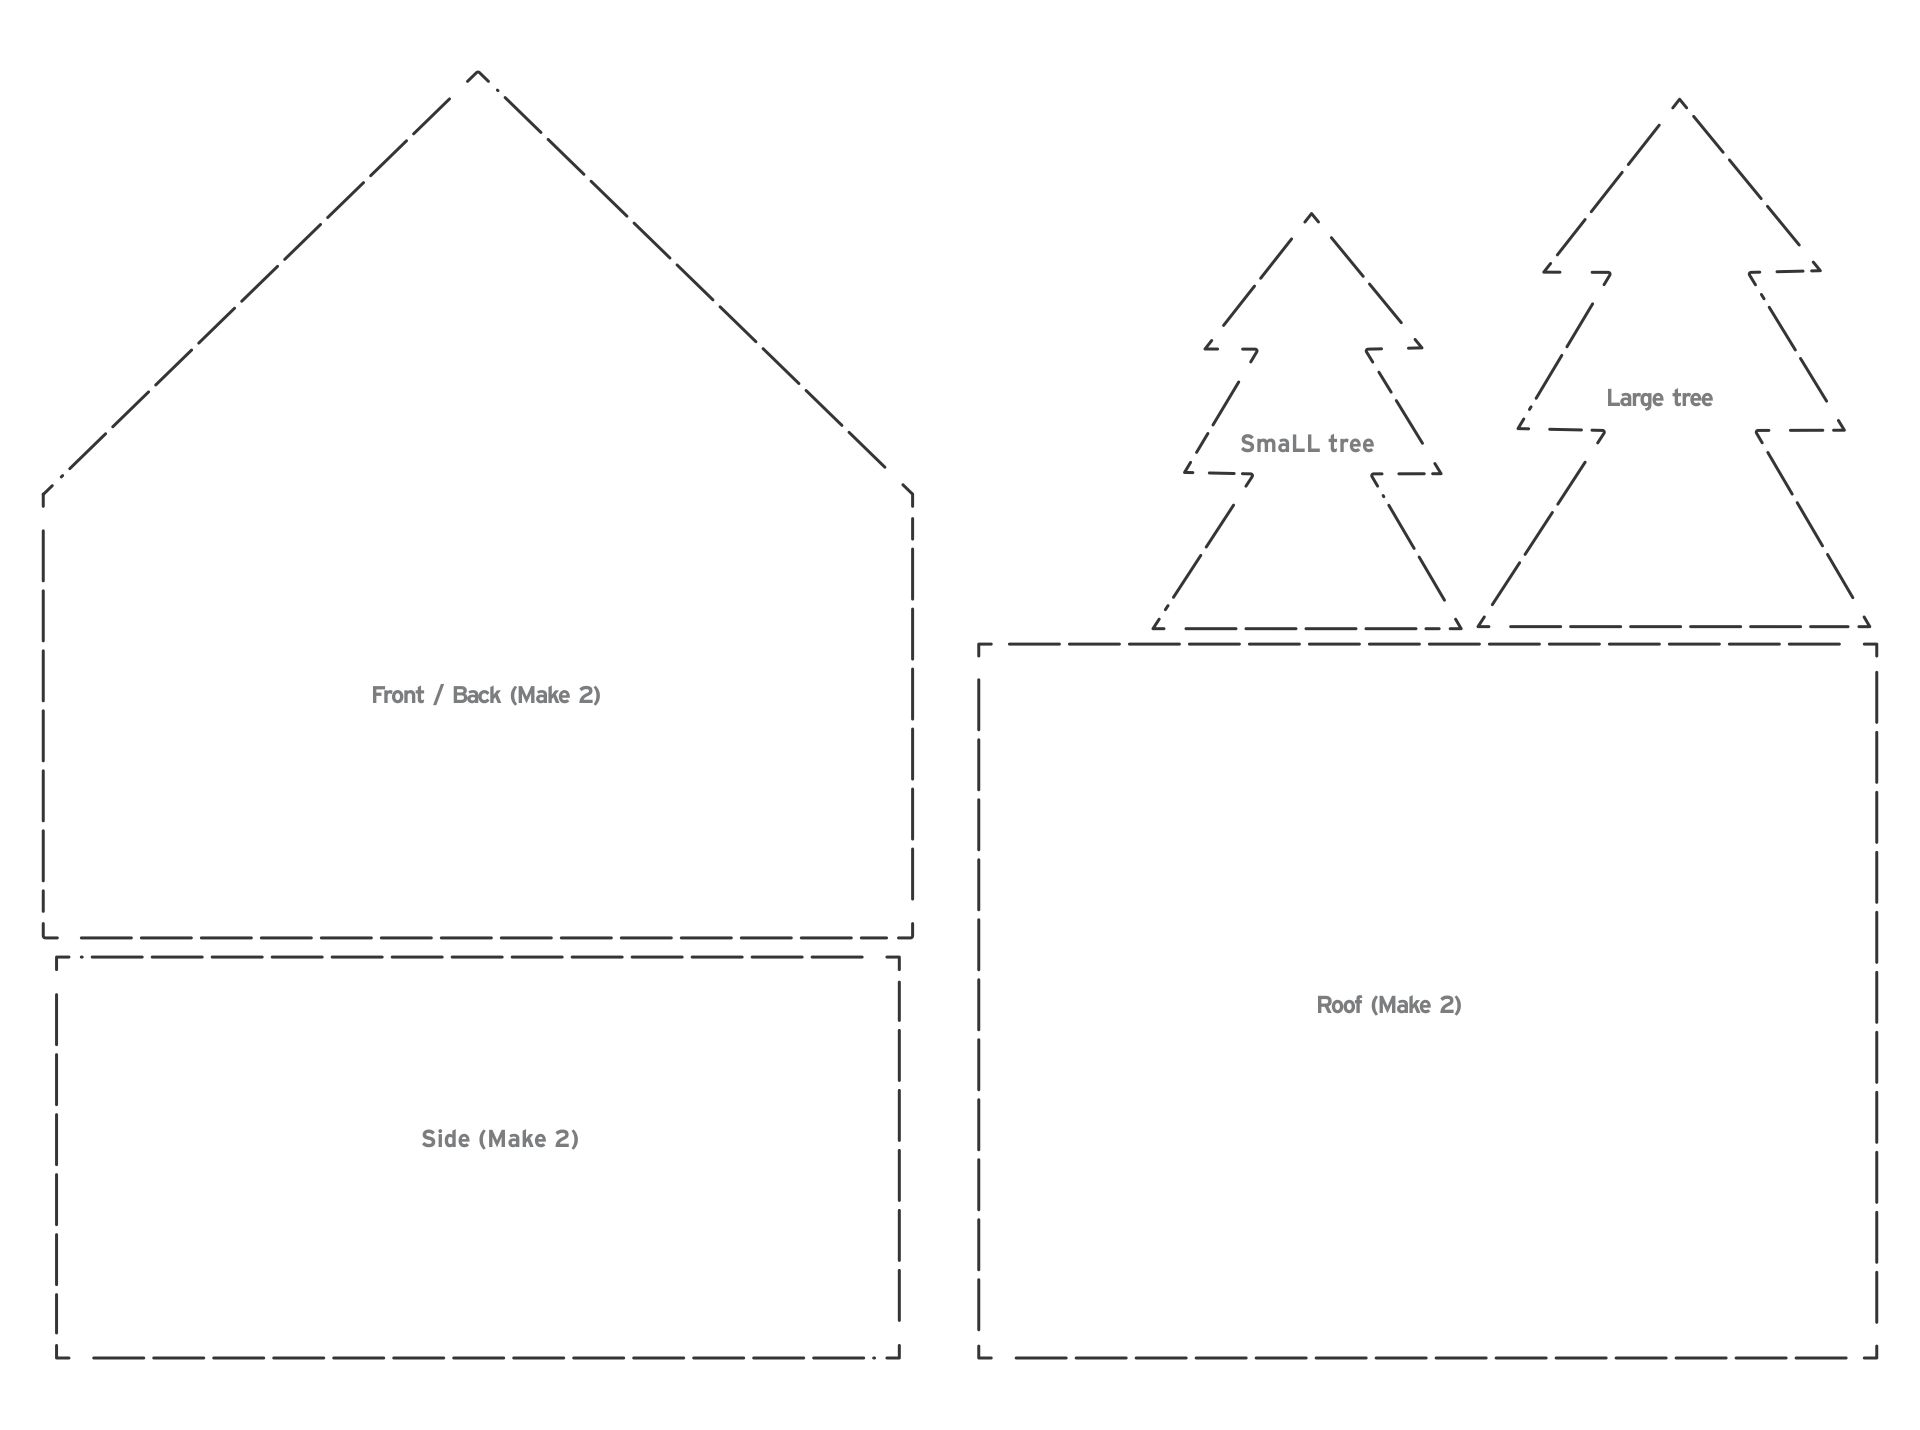 Gingerbread House Template Free Printable